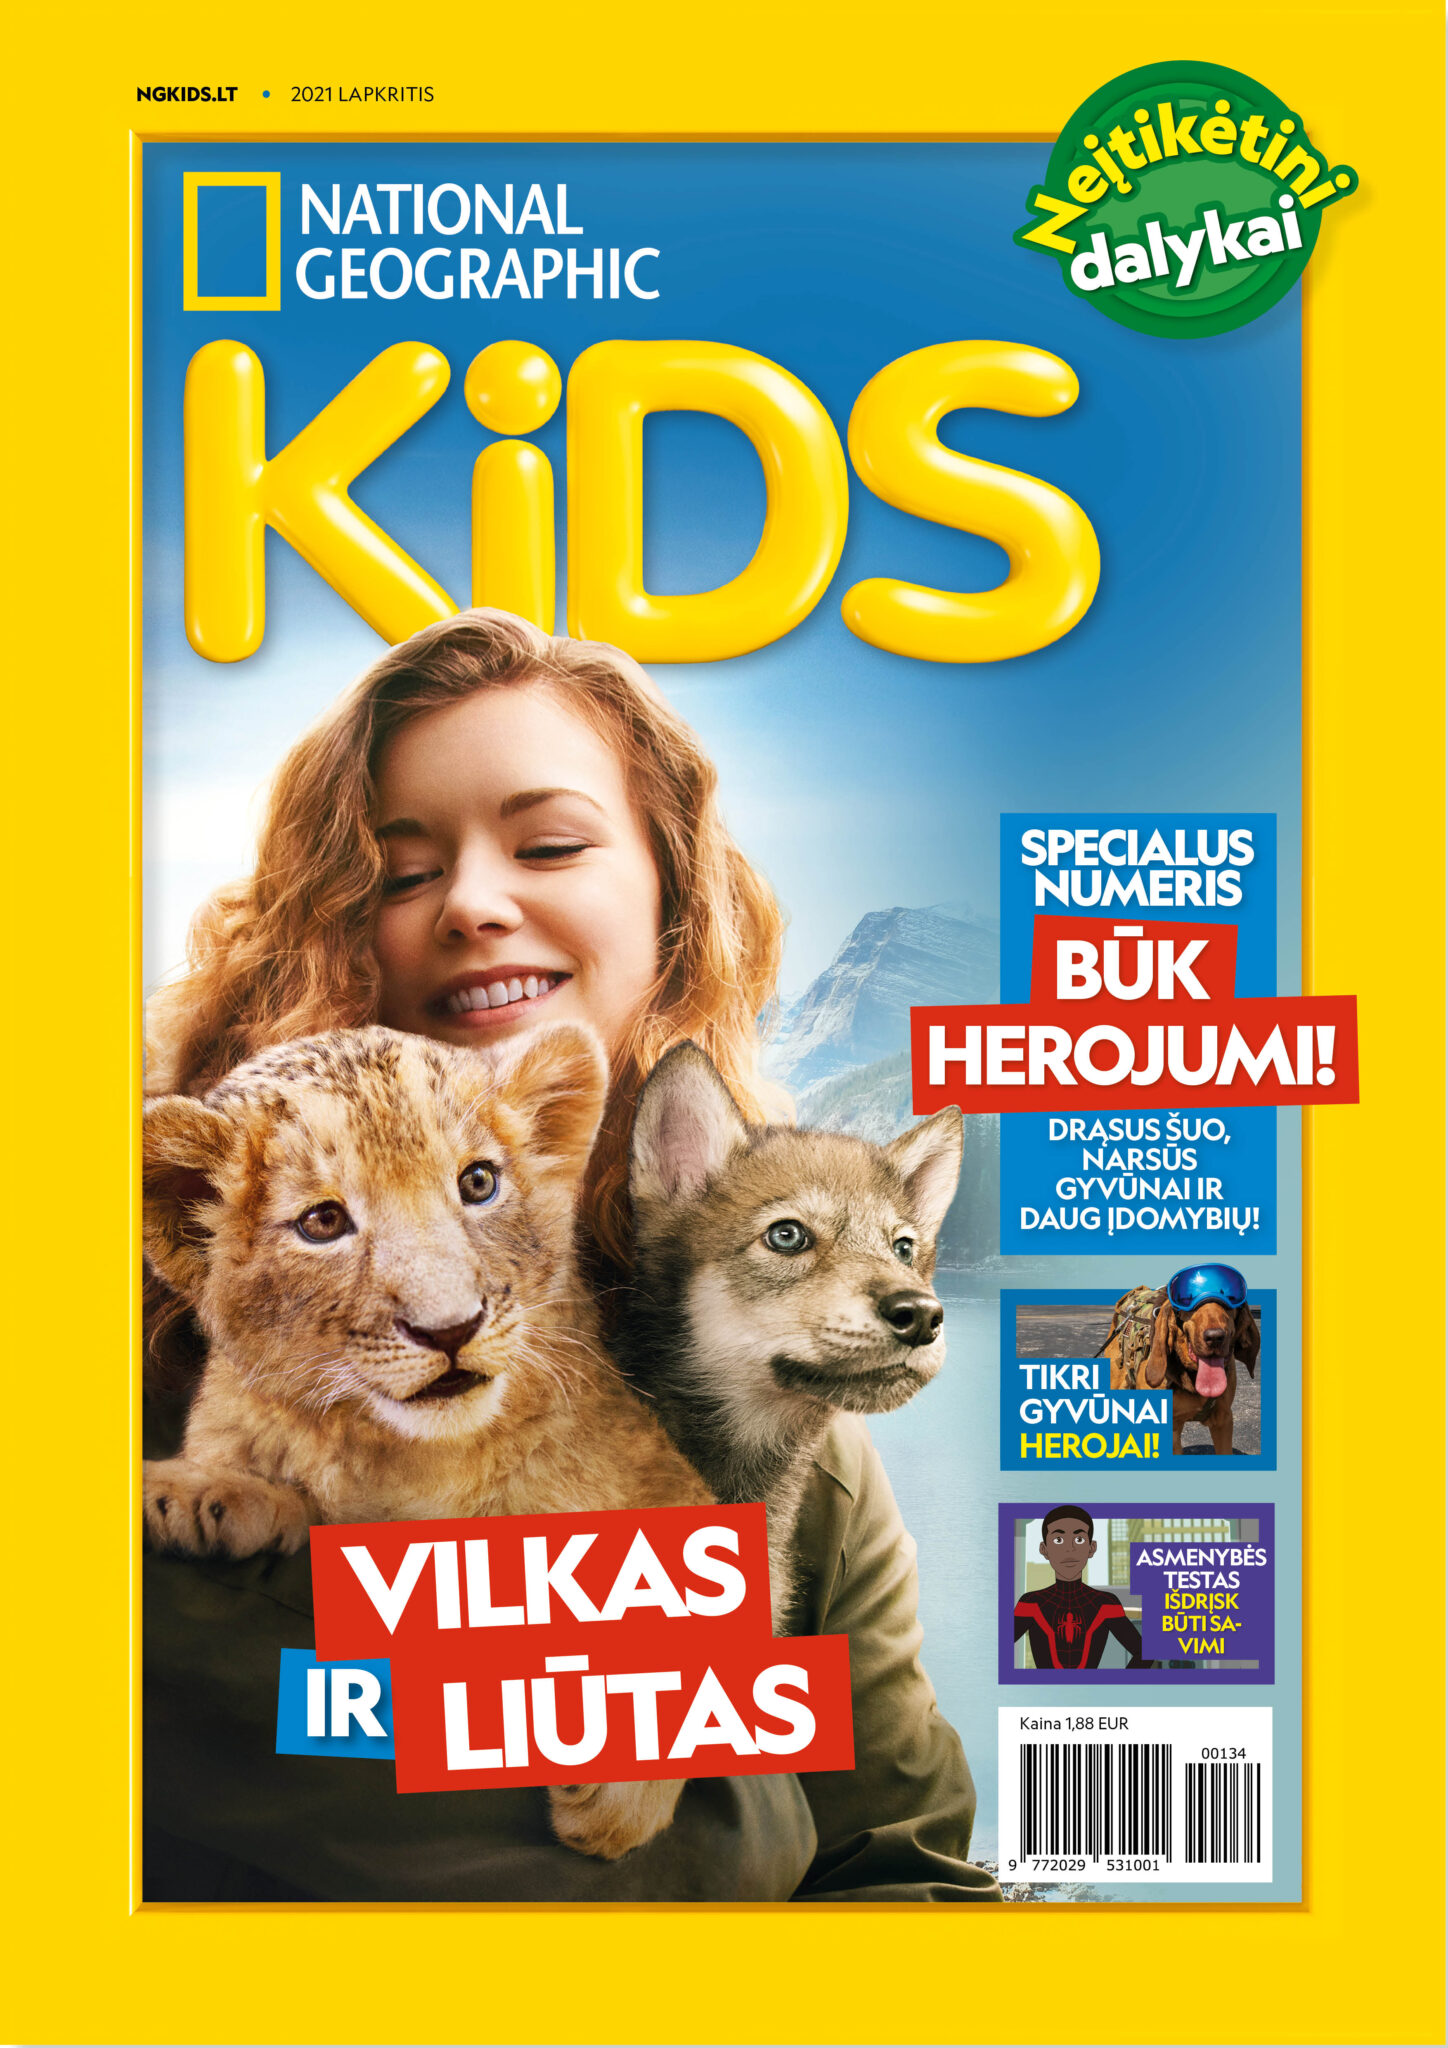 national-geographic-kids-2021-lapkritis-national-geographic